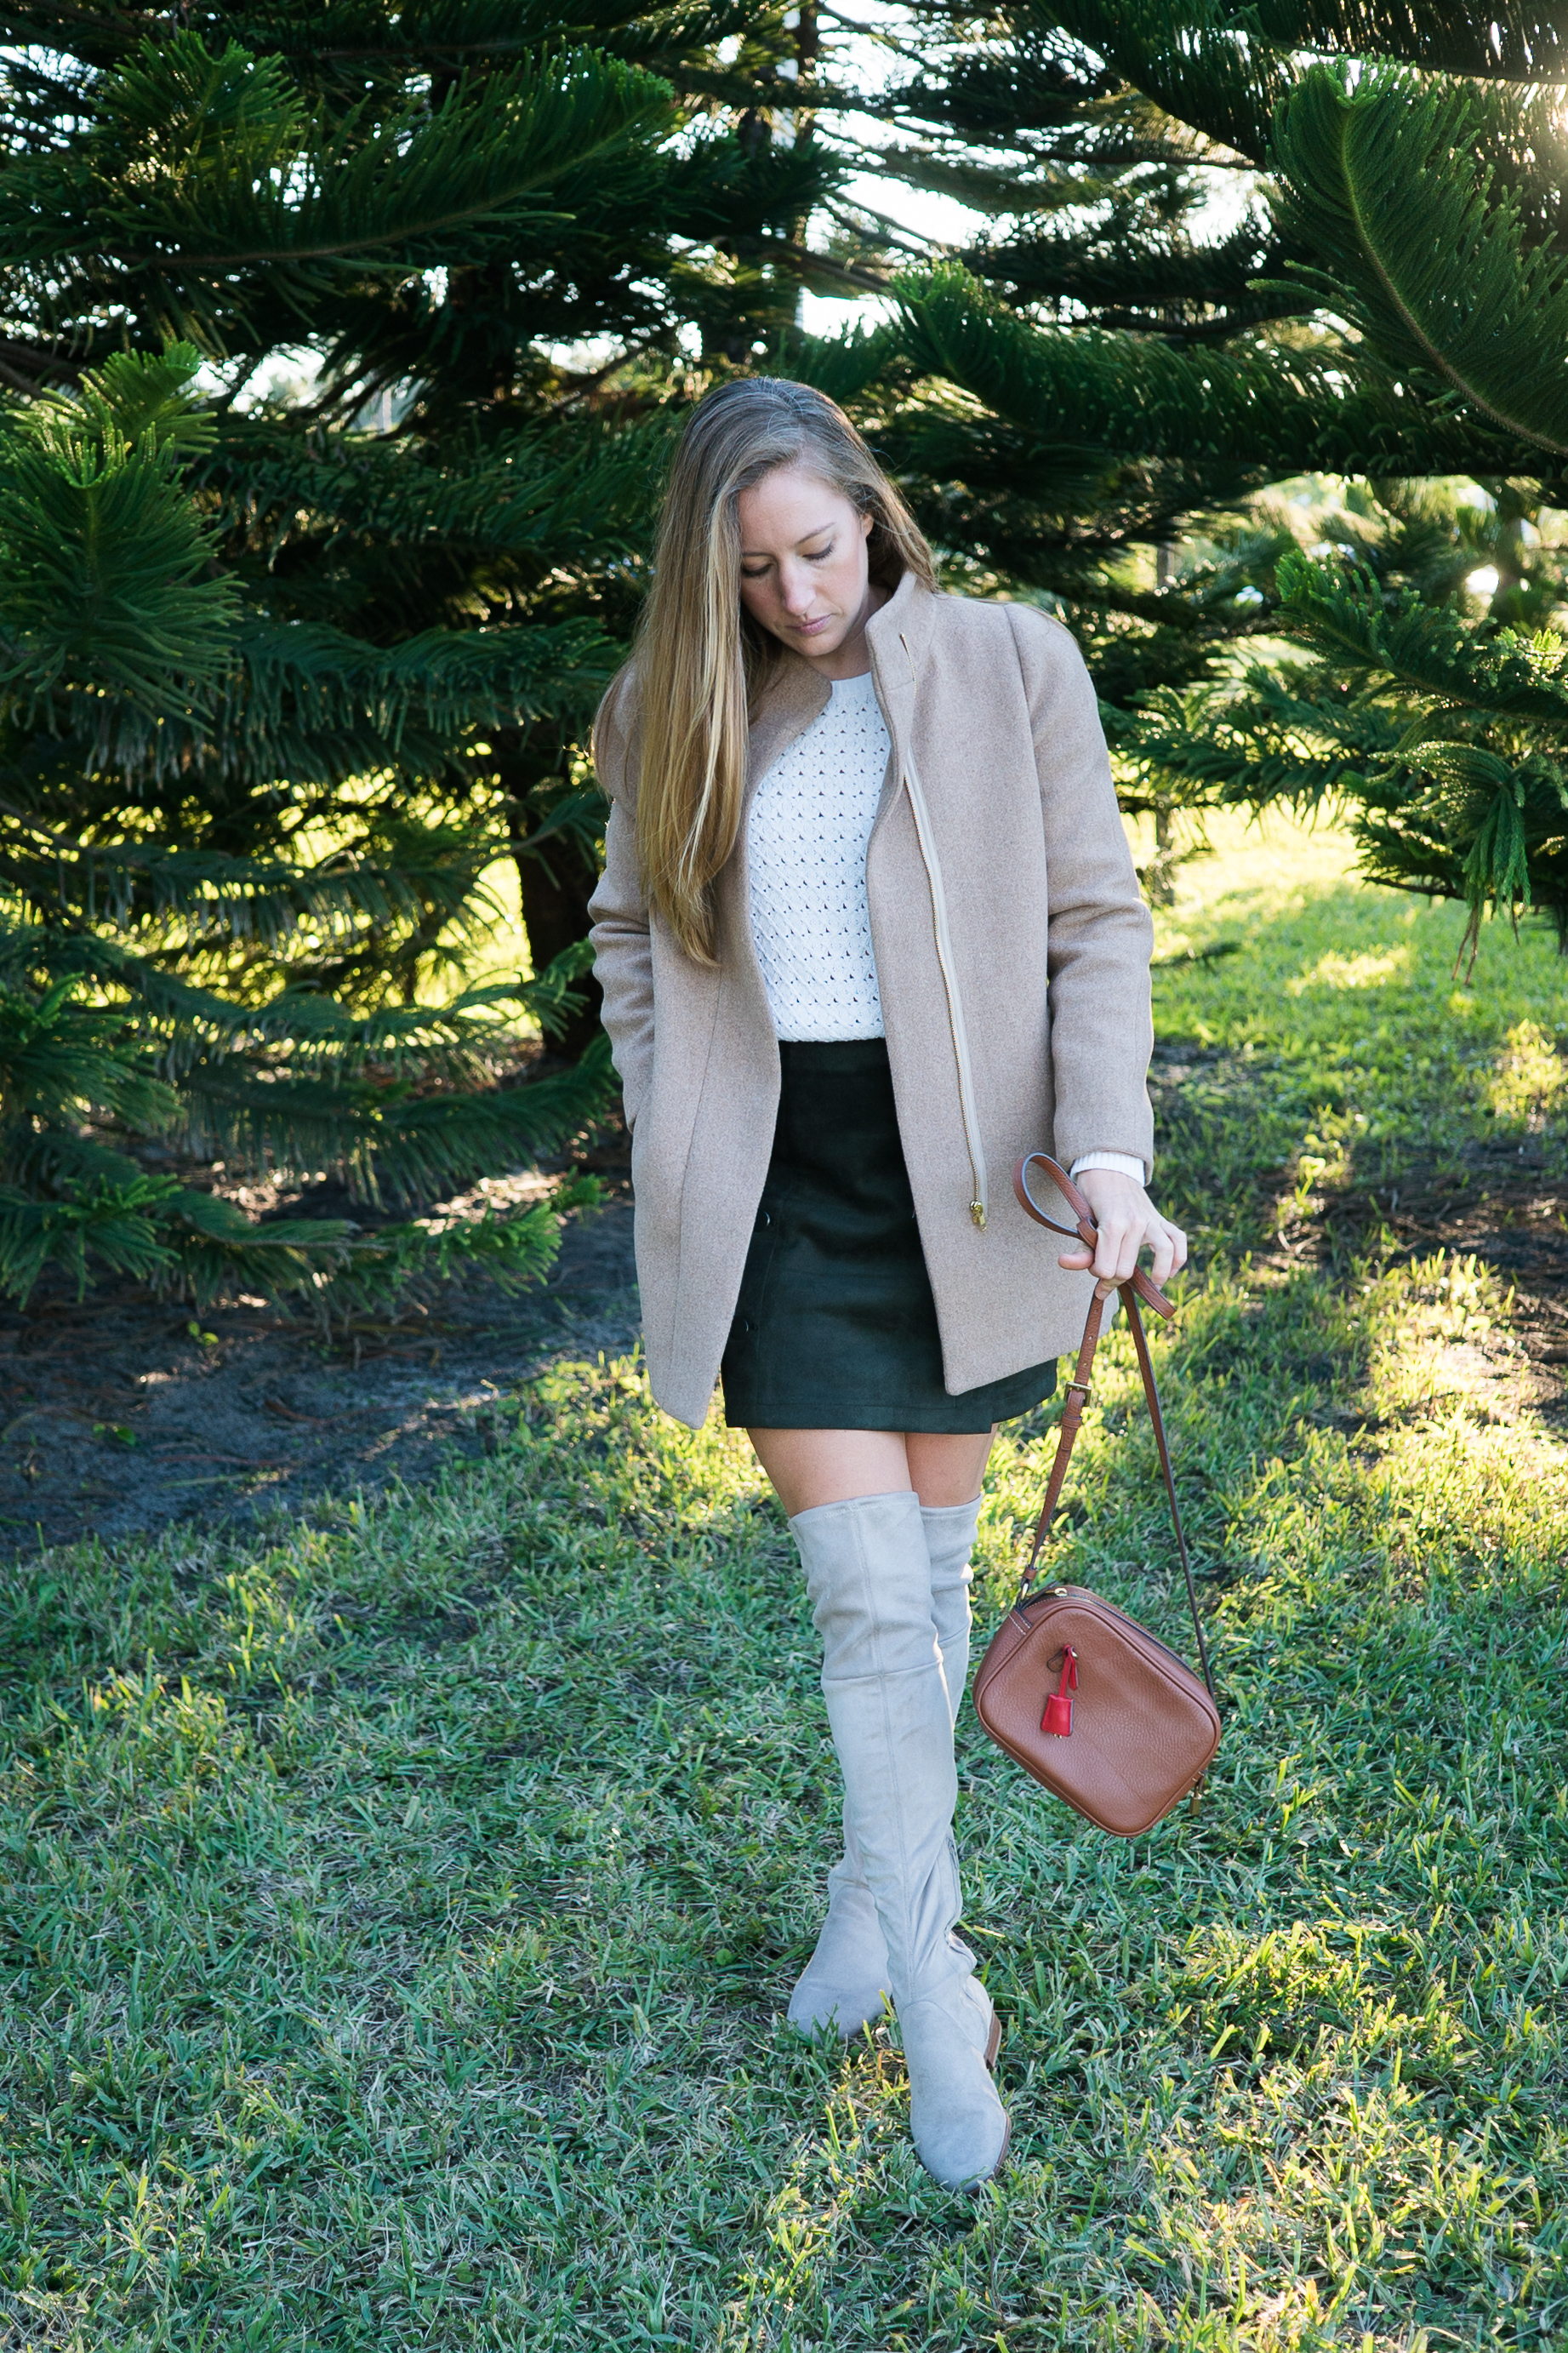 A Classic Winter Coat to Wear During Mild Winters / How to Style a Classic Coat / How to Wear a Classic Coat 
/ J.Crew Factory New City Coat / Winter Outfit Inspiration - Sunshine Style Blog